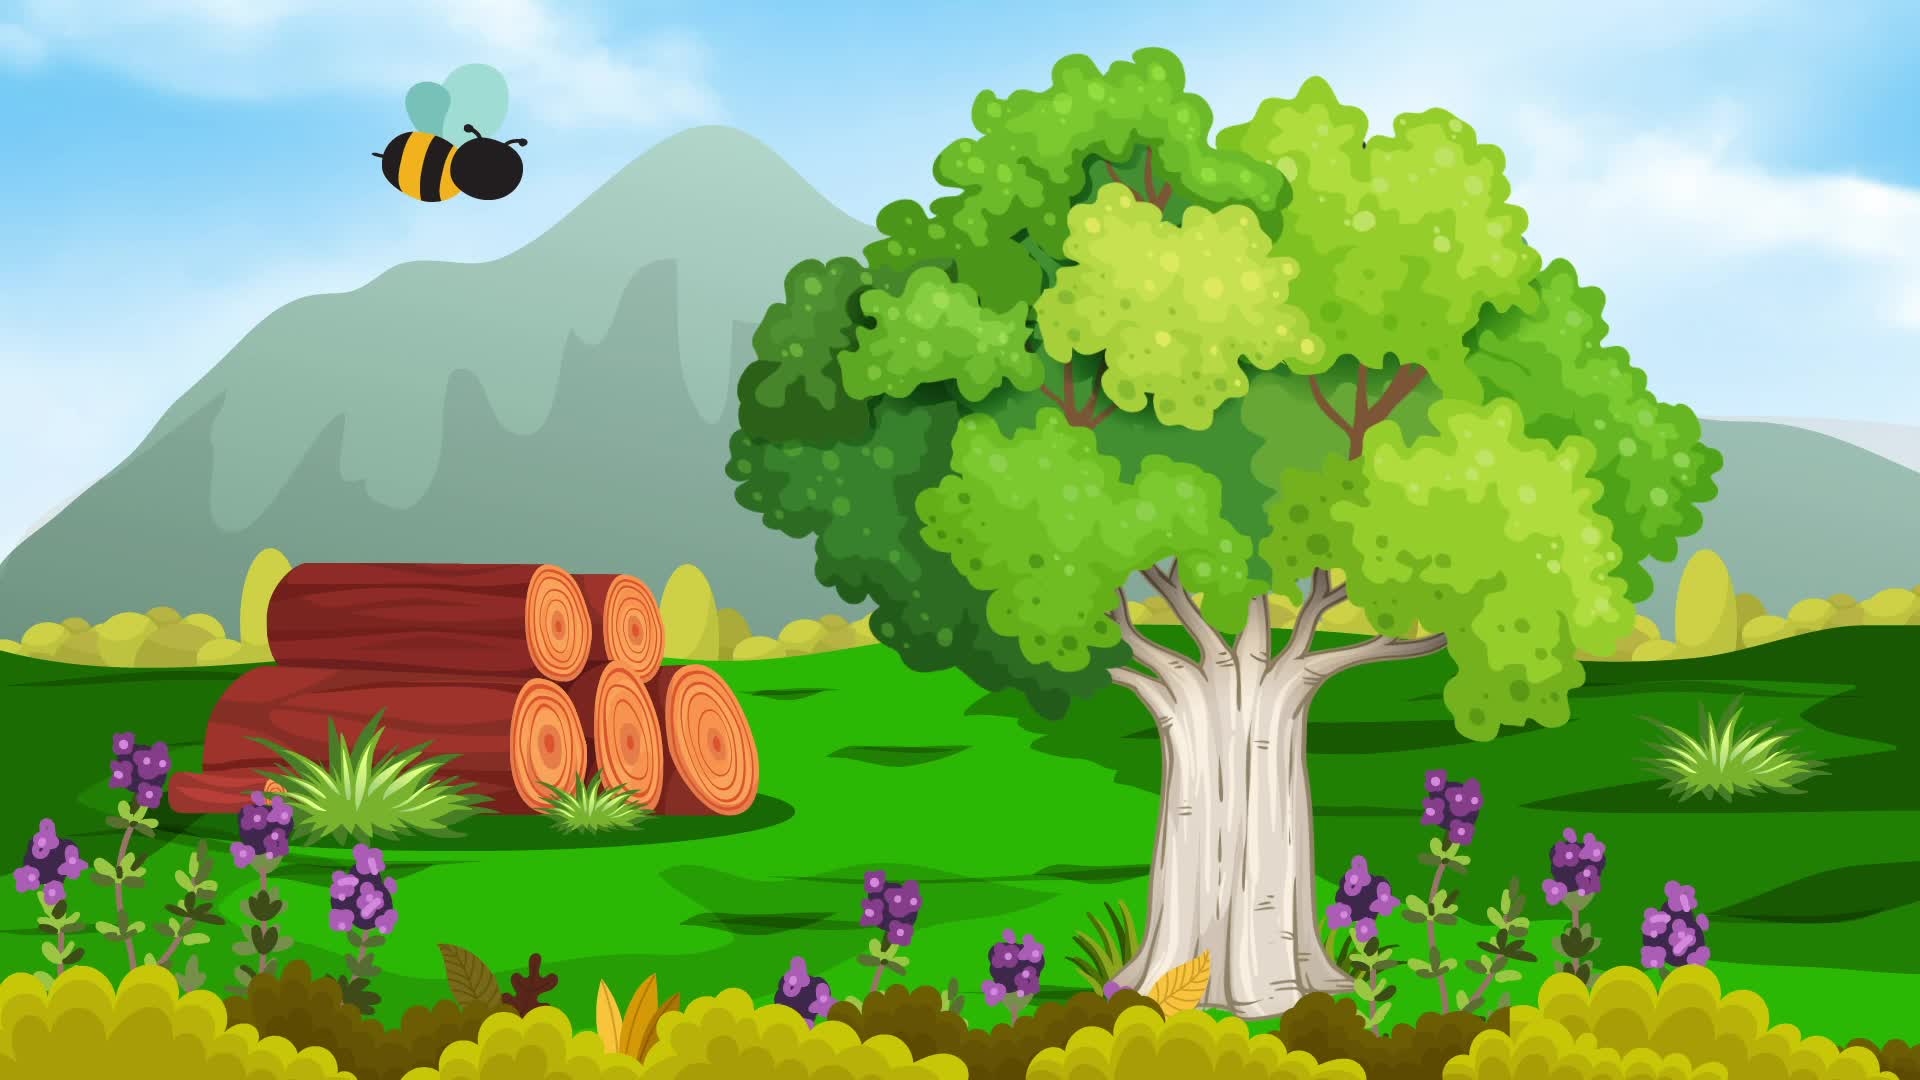 Bees Cartoon Stock Video Footage for Free Download